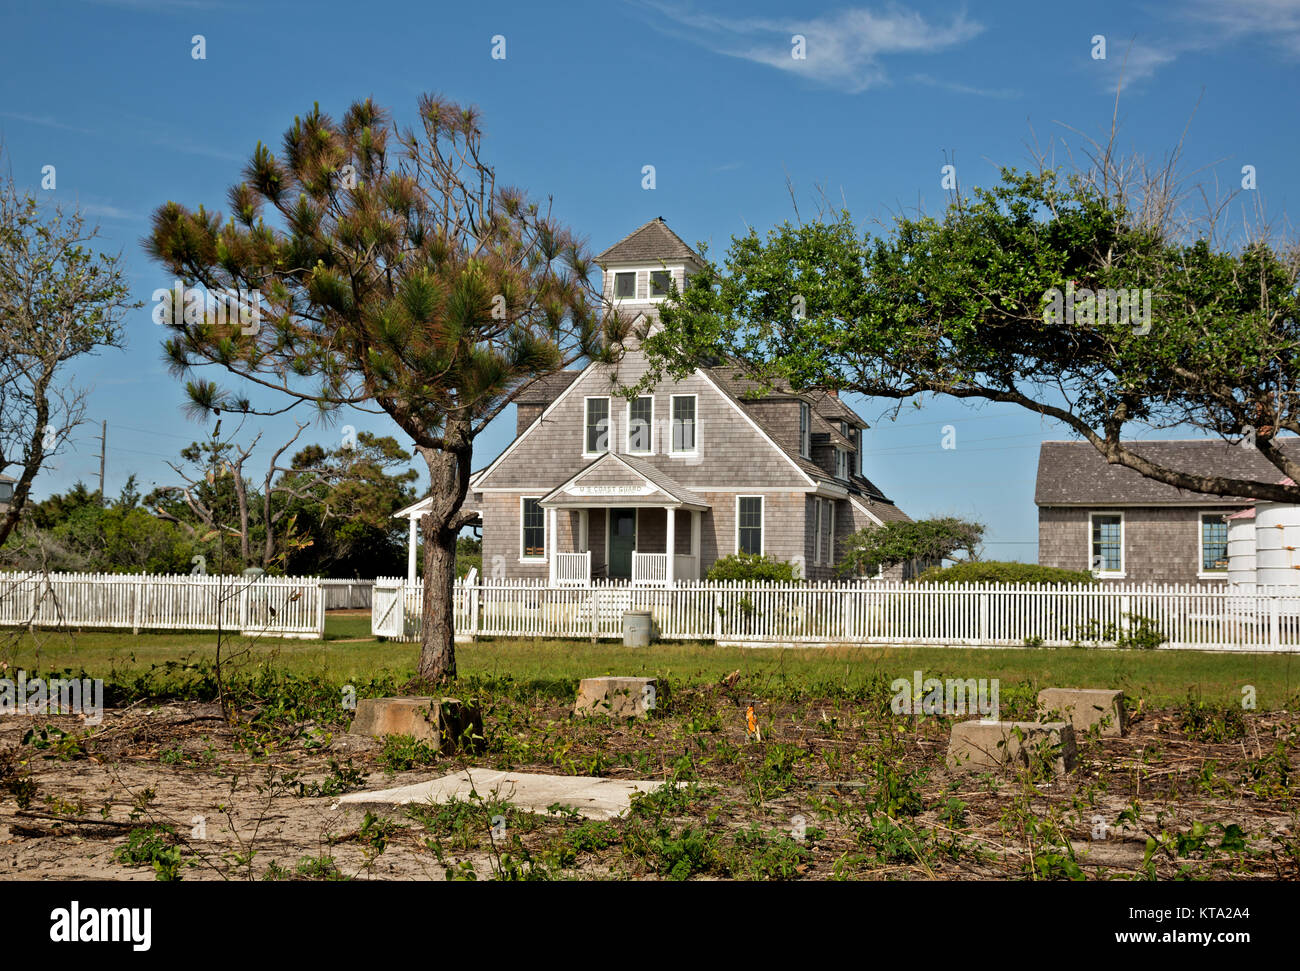 NC01154-00...NORTH CAROLINA - Chicamacomico Life Saving Station museum located on the Outer Banks in Rodanthe. Stock Photo